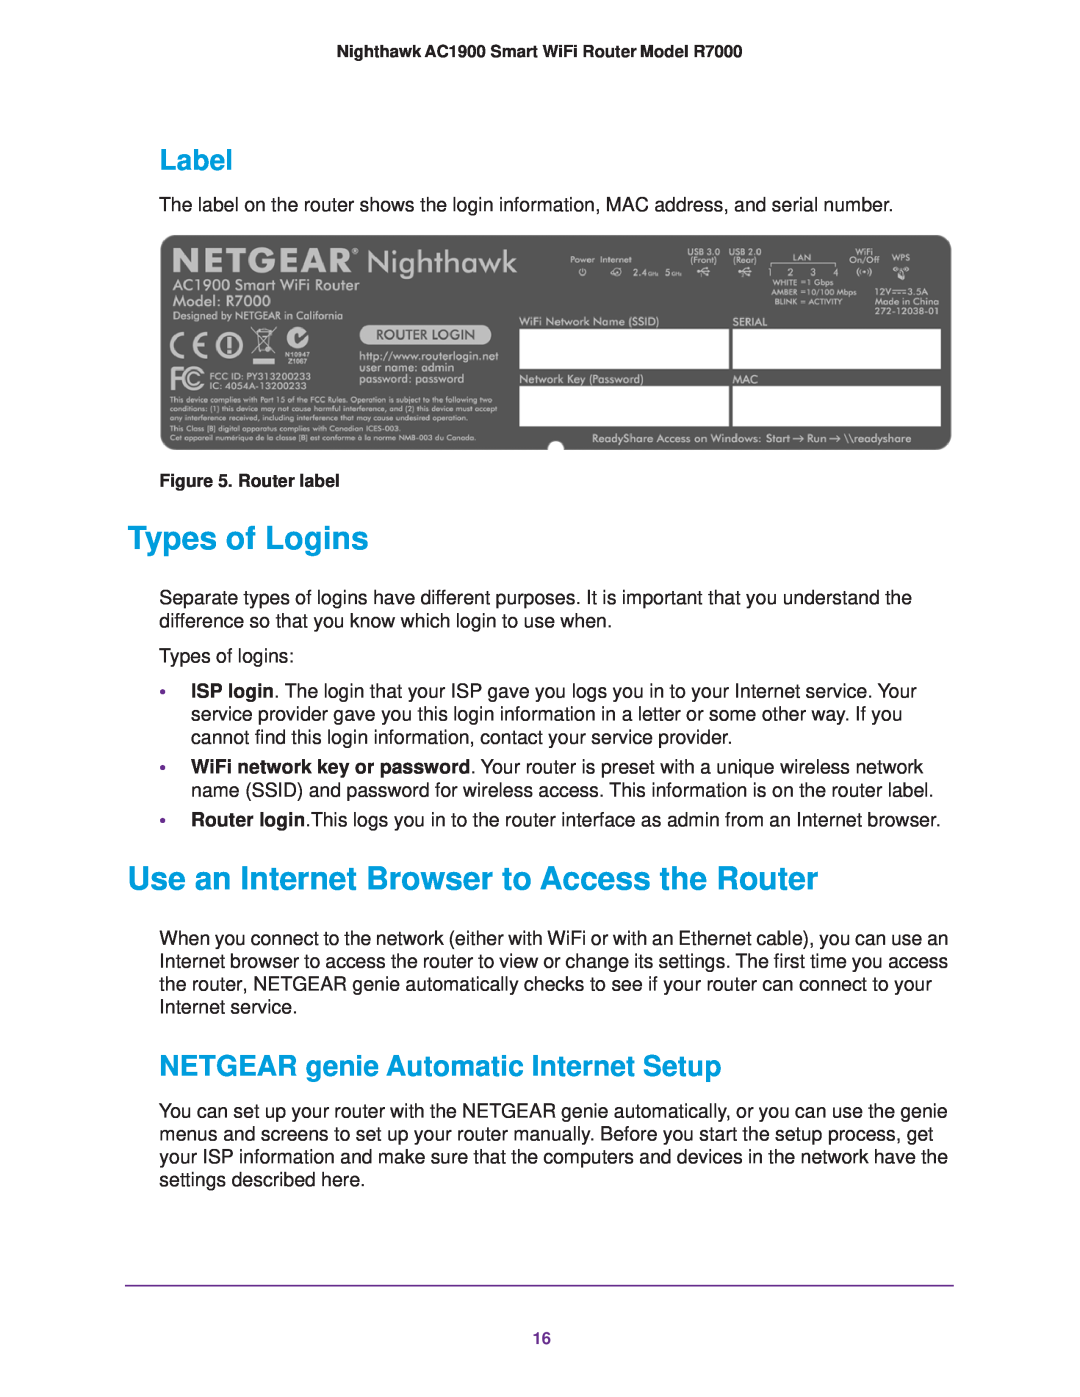 NETGEAR R7000 Types of Logins, Use an Internet Browser to Access the Router, Label, NETGEAR genie Automatic Internet Setup 